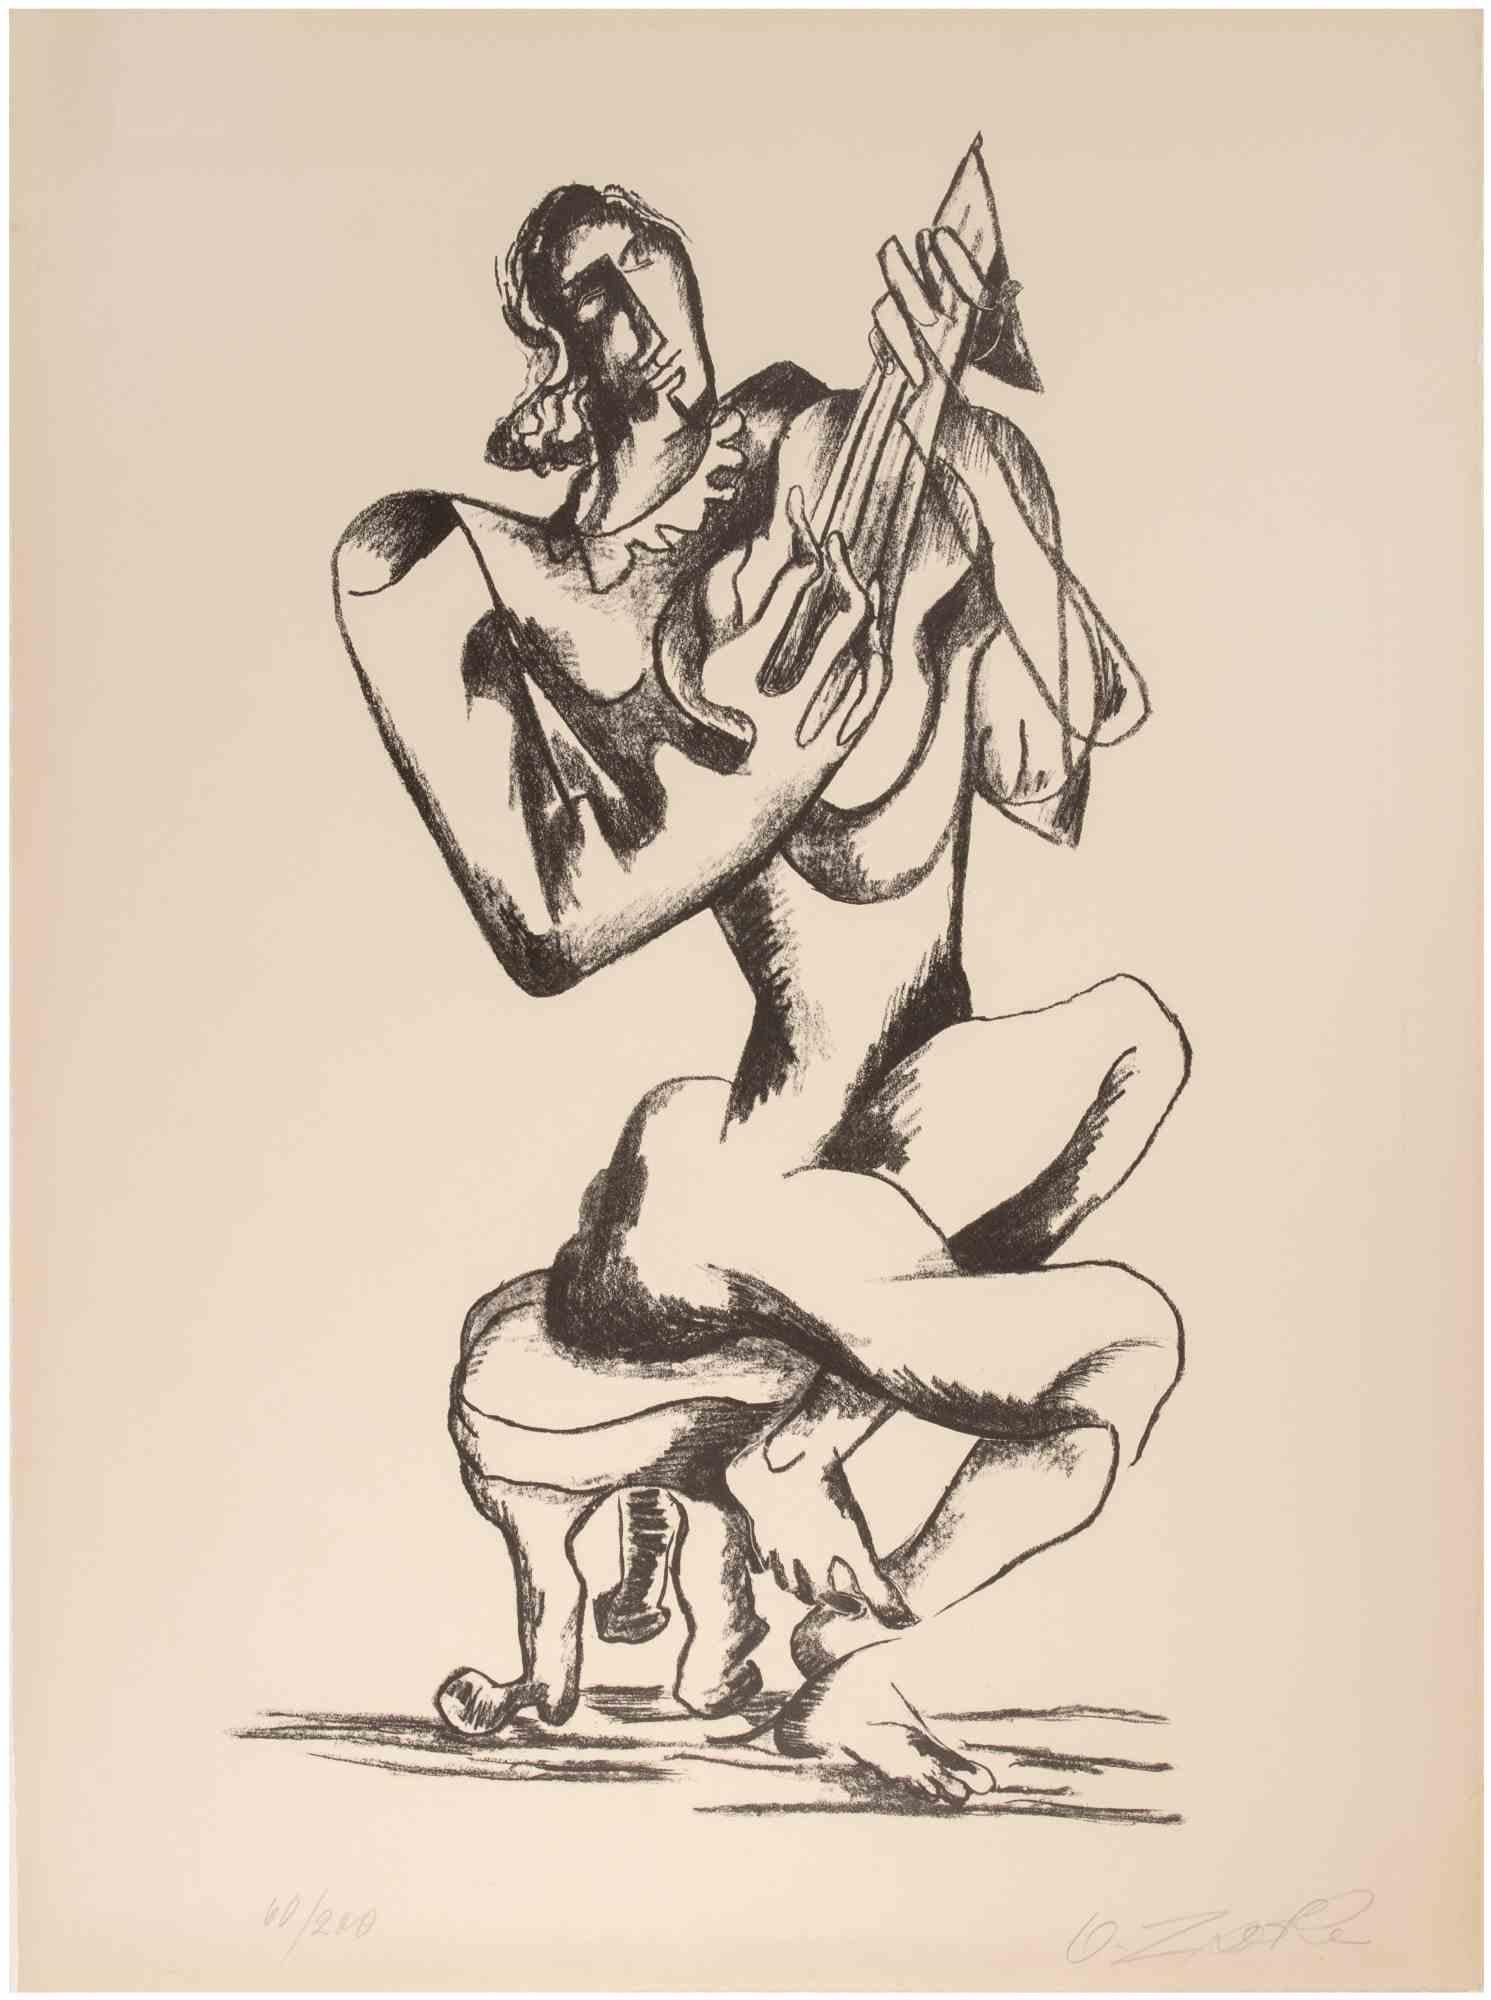 Lute Player is a contemporary artwork realized by Ossip Zadkine.

Lithograph on BFK Rives, with watermark and dry stamp 'Bodensee Verlag'.

Includes passepartout each 87,5 x 68 cm.

Hand signed on the lower right and numbered '60/200' on thr lower